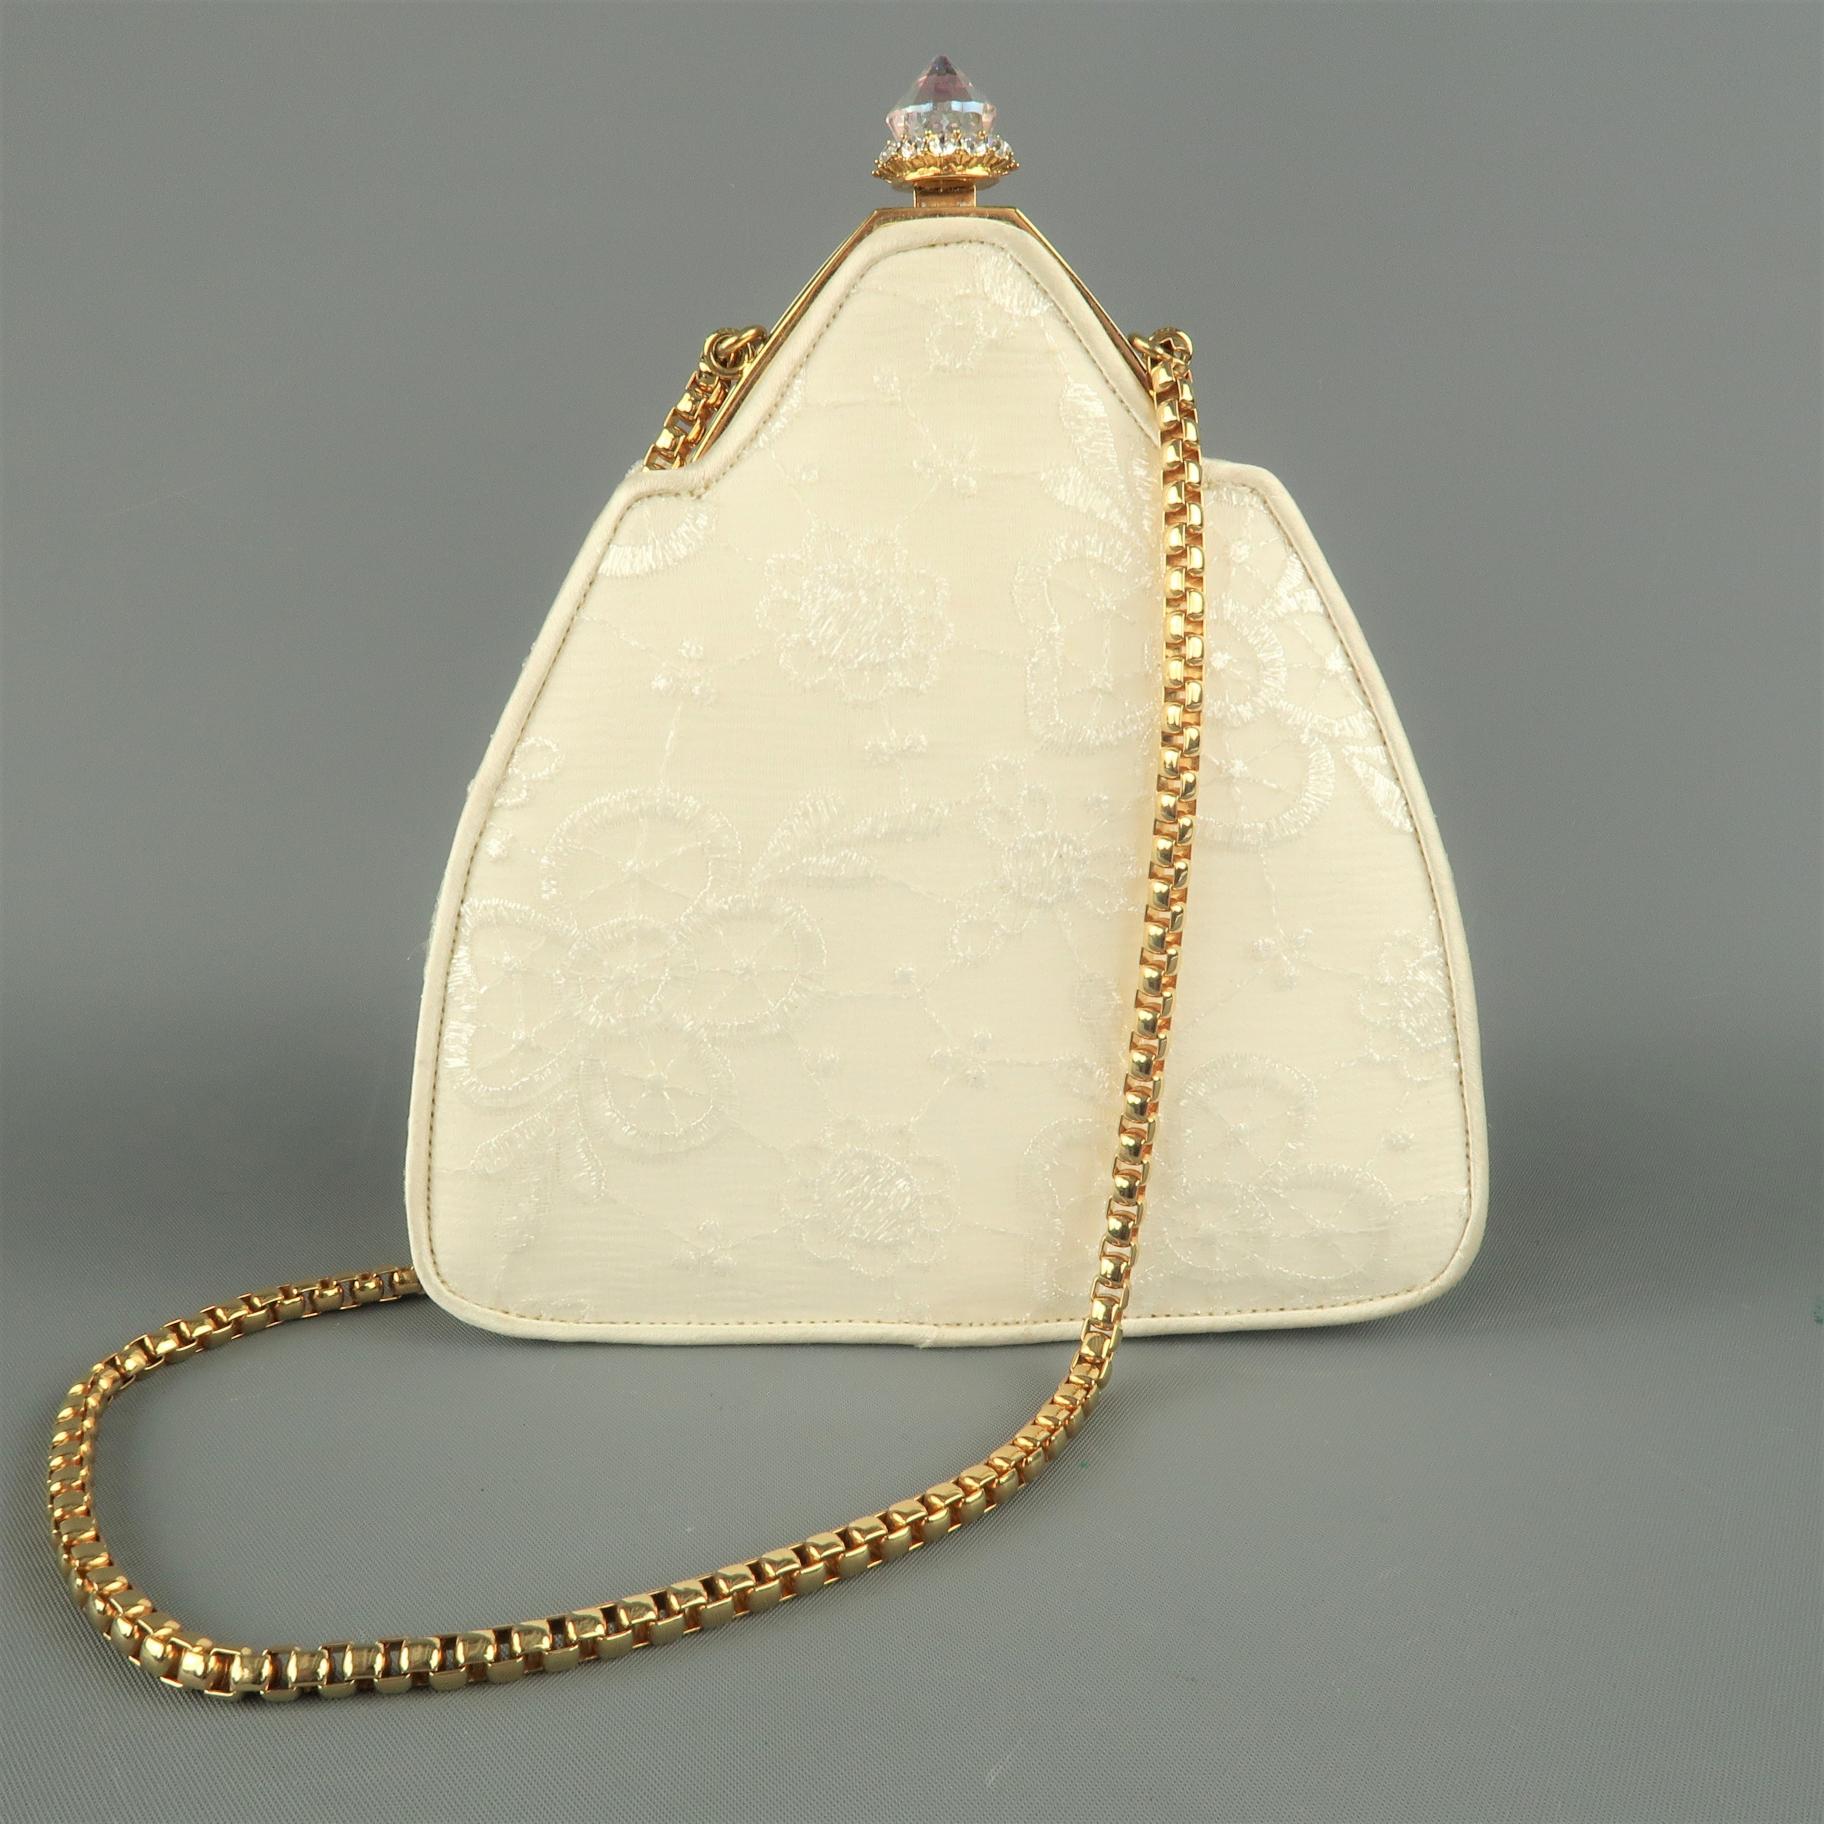 Vintage JUDITH LEIBER evening bag comes in cream lace textured silk with a gold tone hinge closure with aurora borealis crystal, gold tone chain, and satin liner. Includes mini mirror and coin purse.
 
Excellent Pre-Owned Condition.
 
Measurements:
